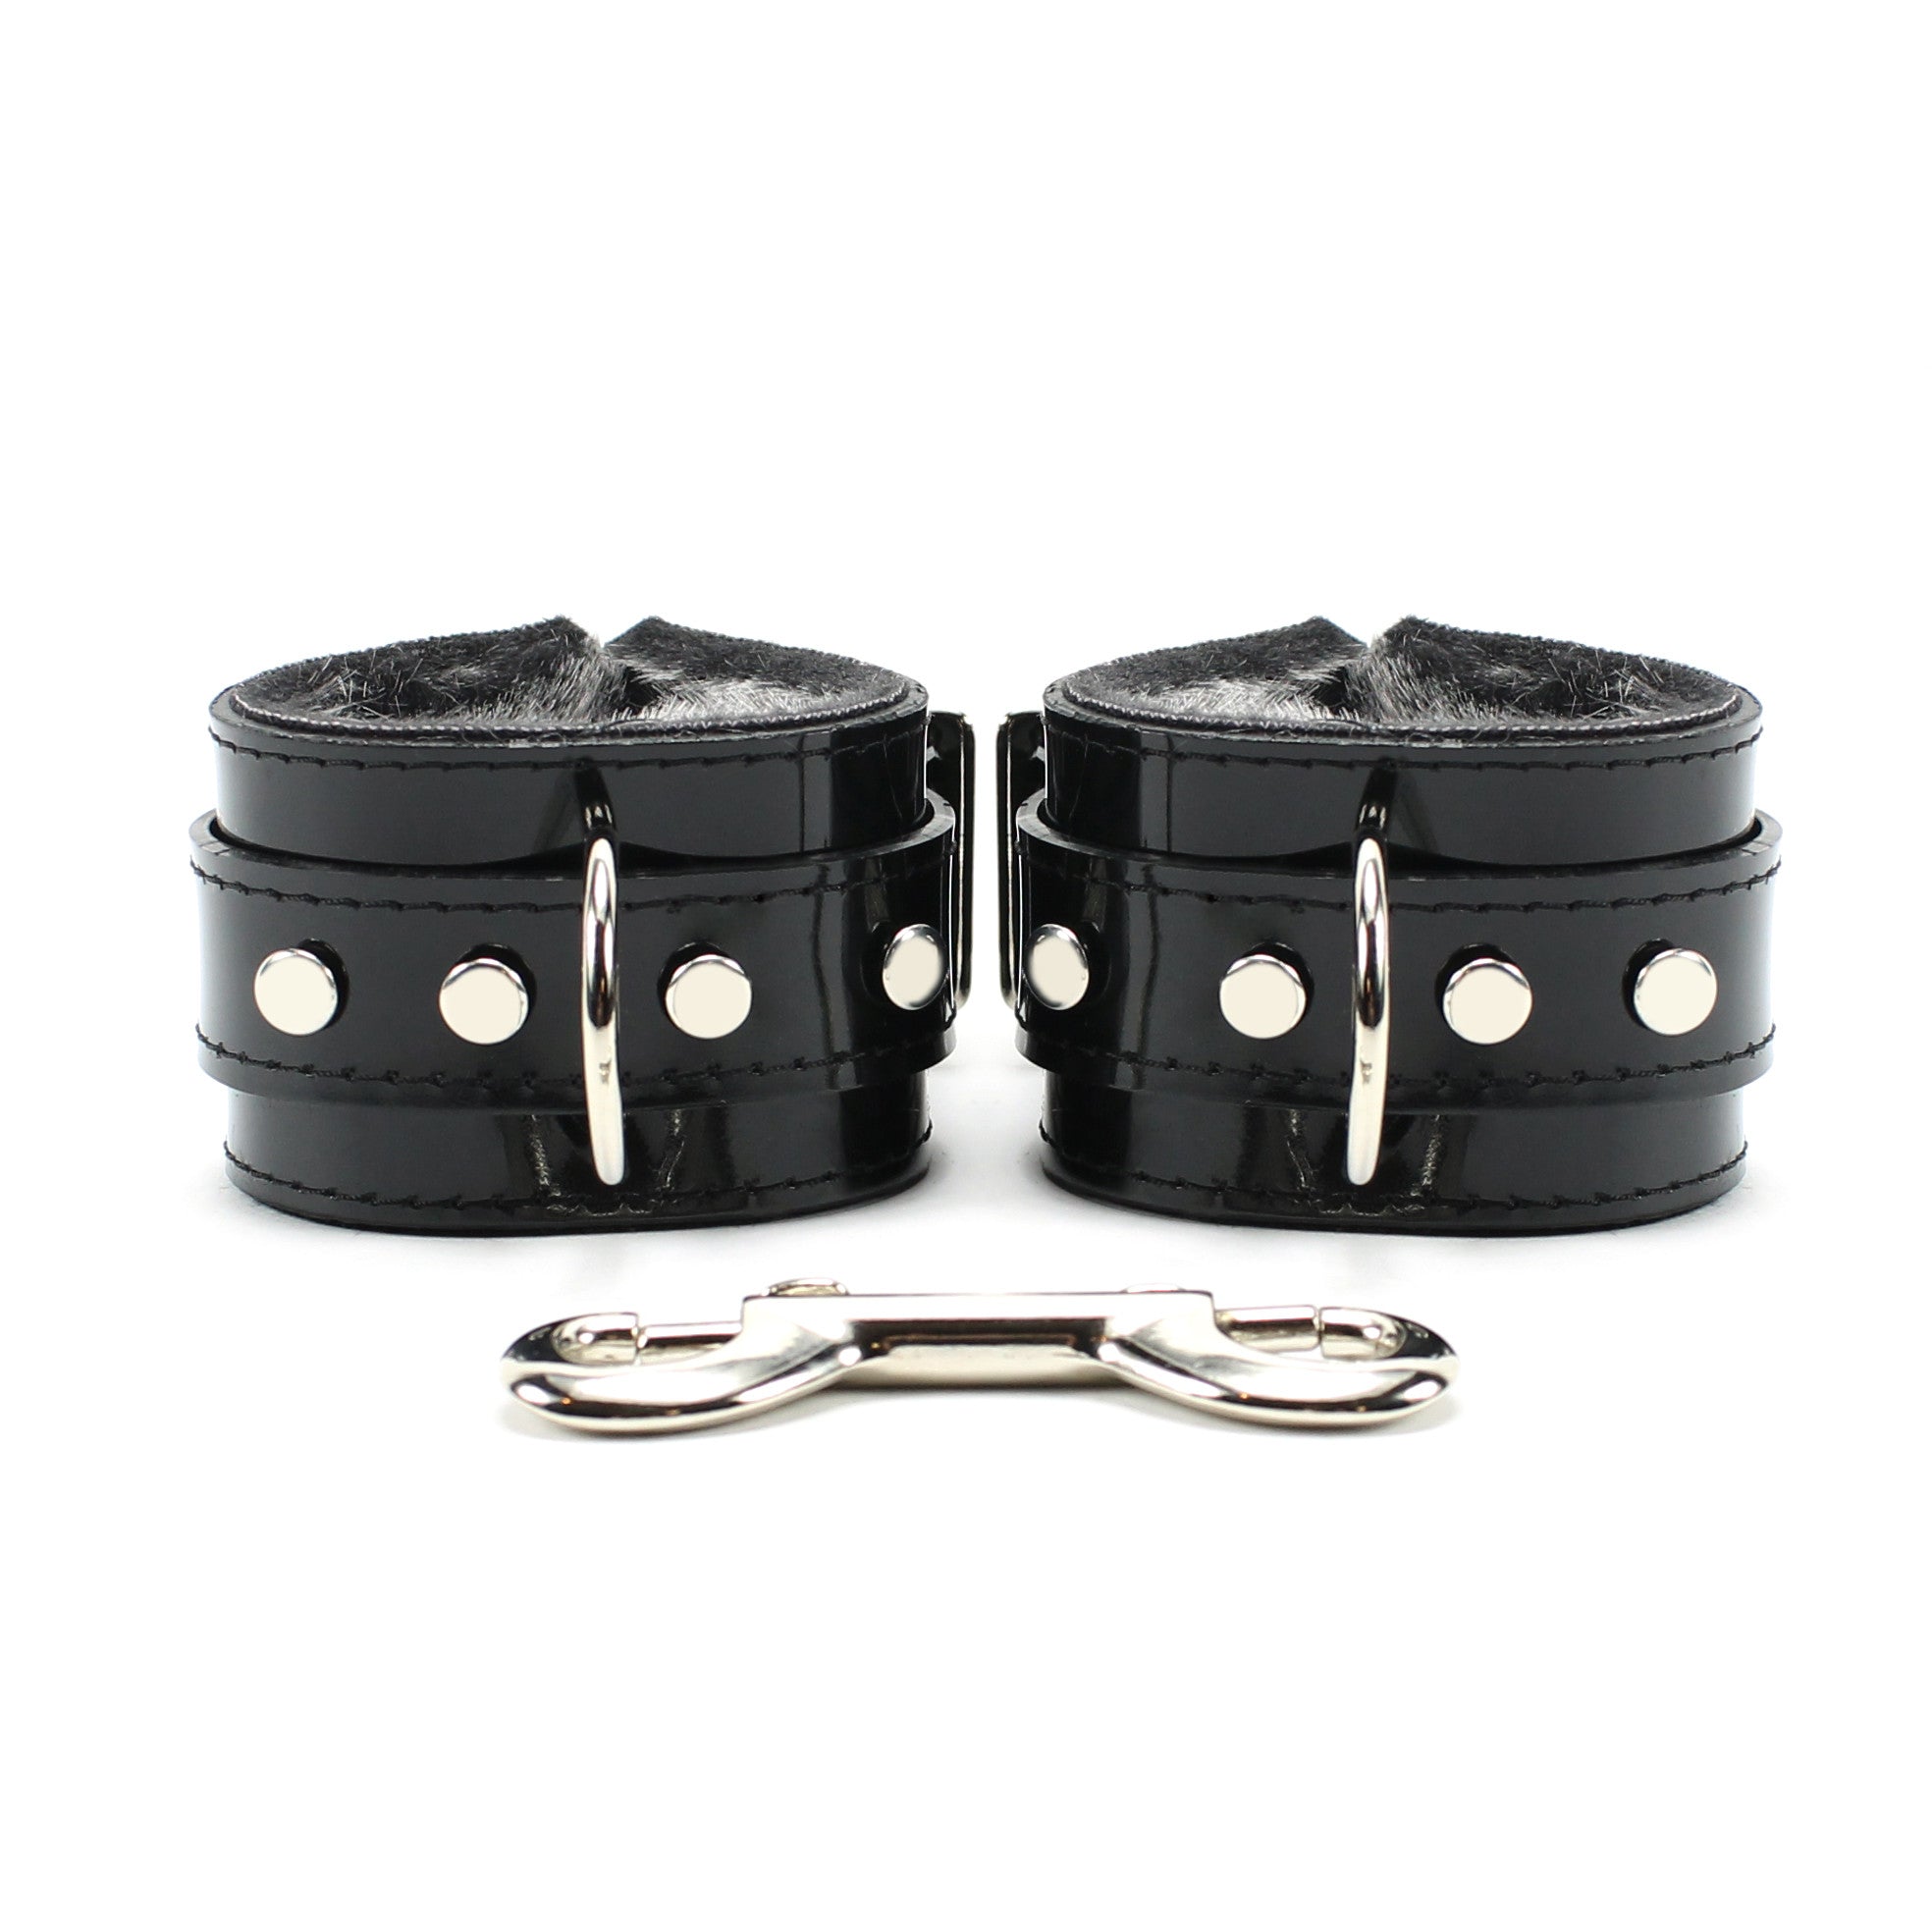 High-end lockable vegan fur-lined bdsm cuffs black with silver D-rings